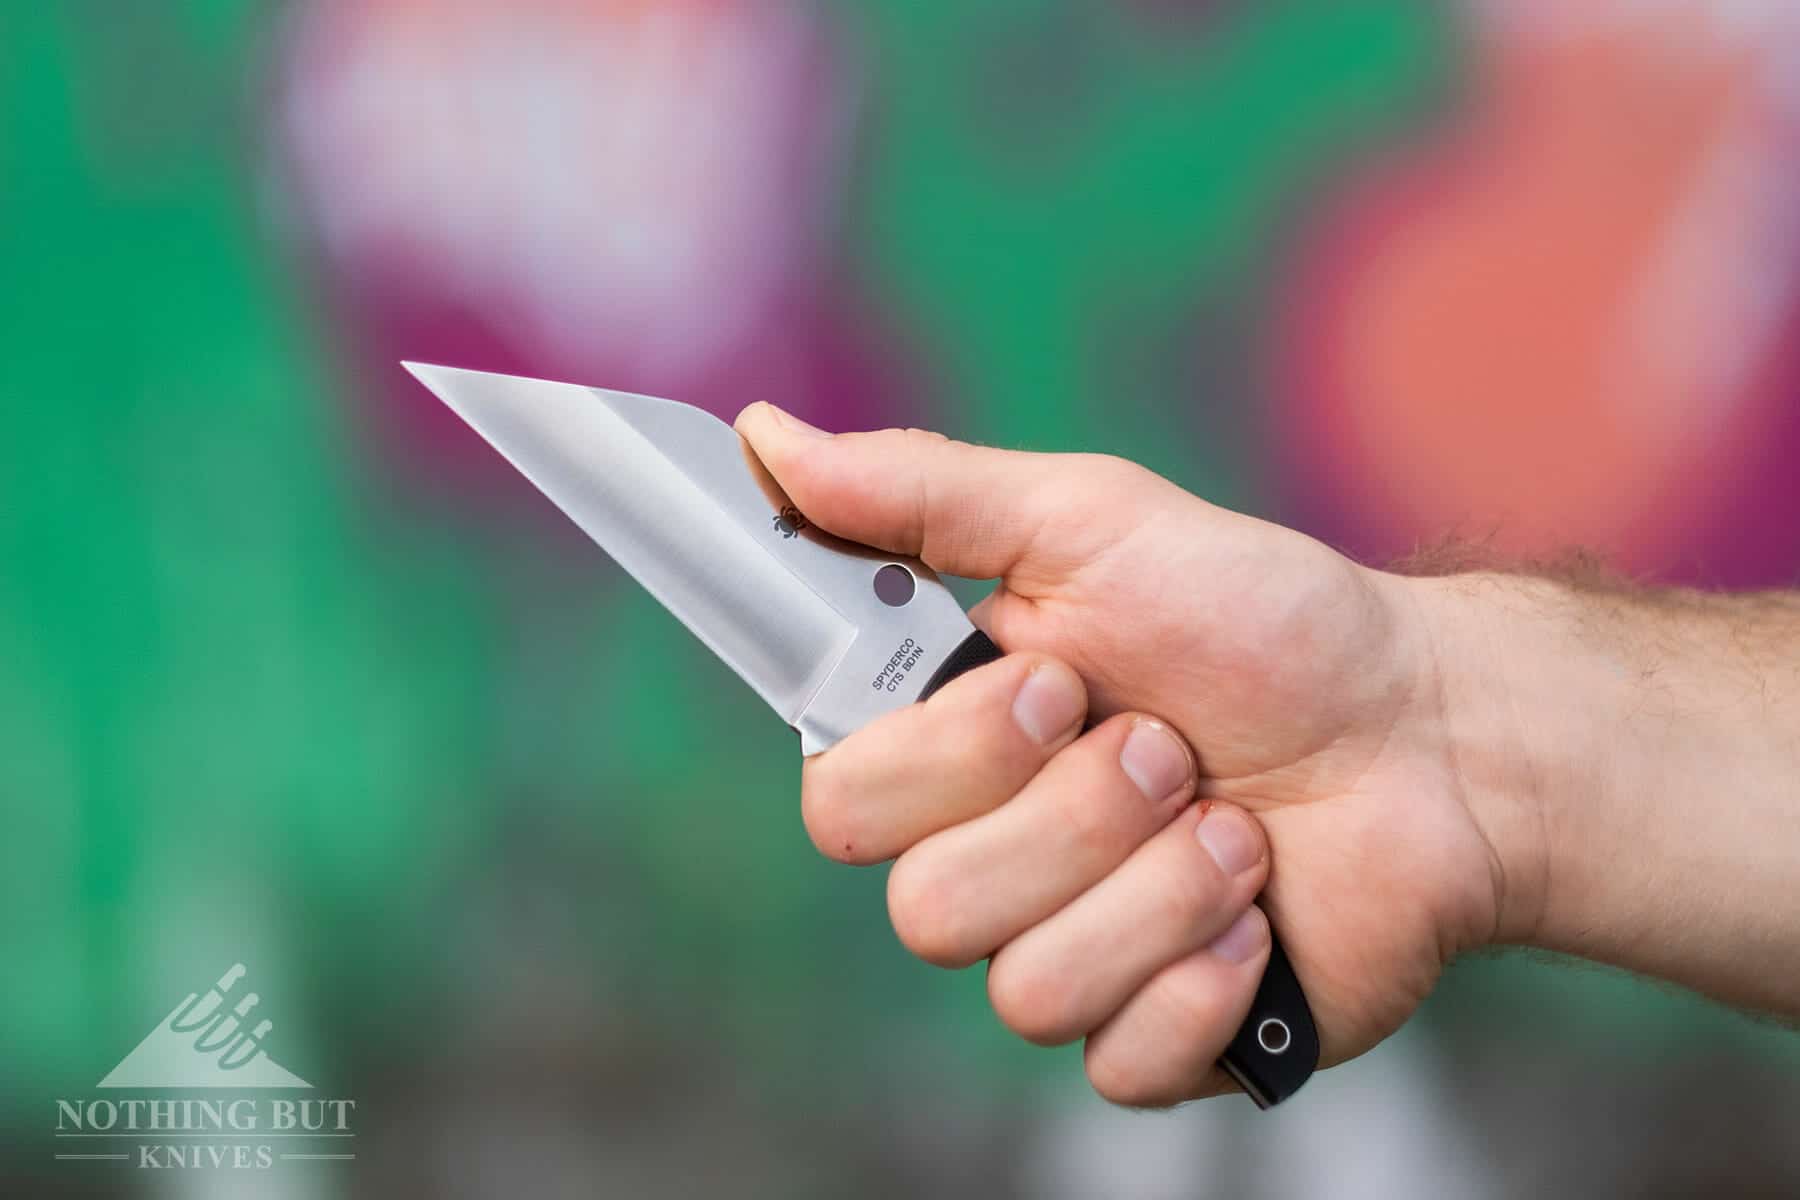 The shape of this knife is designed for your thumb to rest on the spine